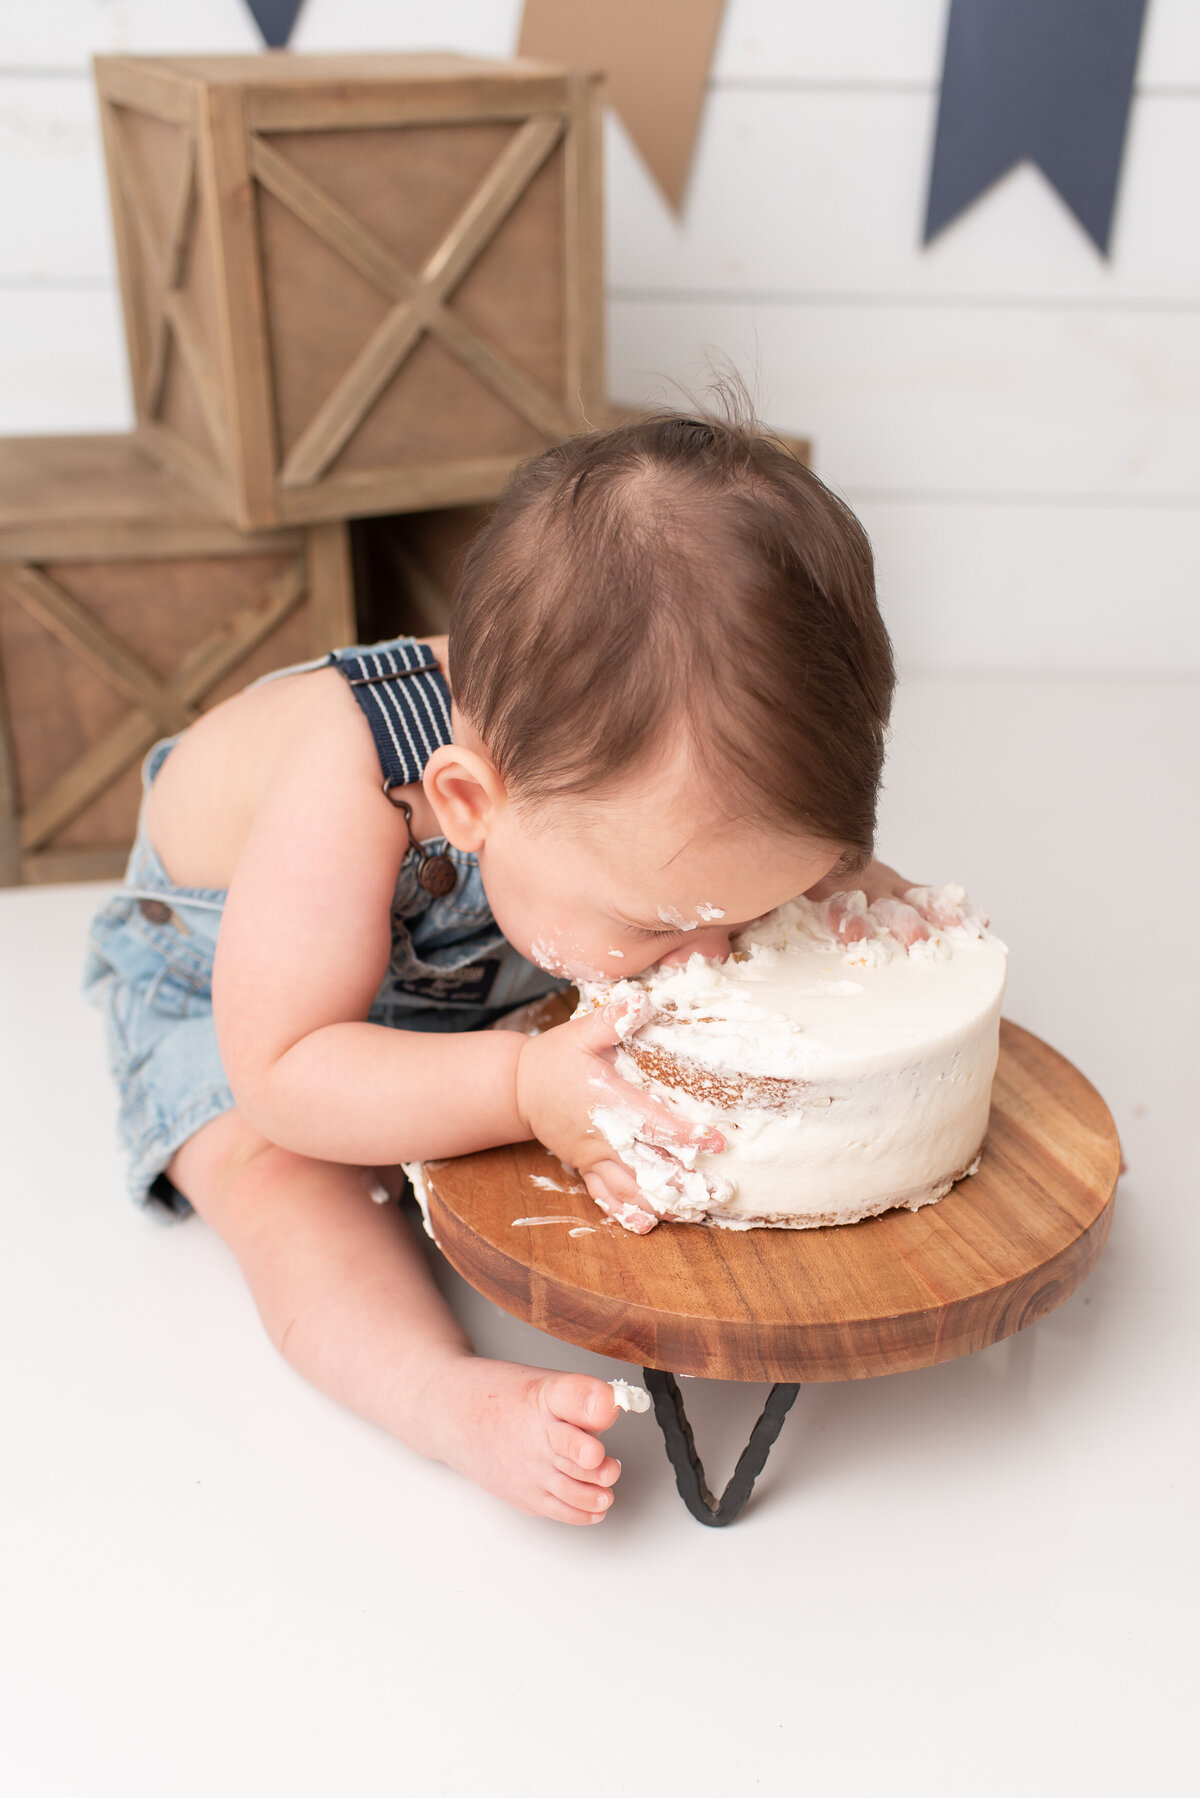 Baby face planting in cake